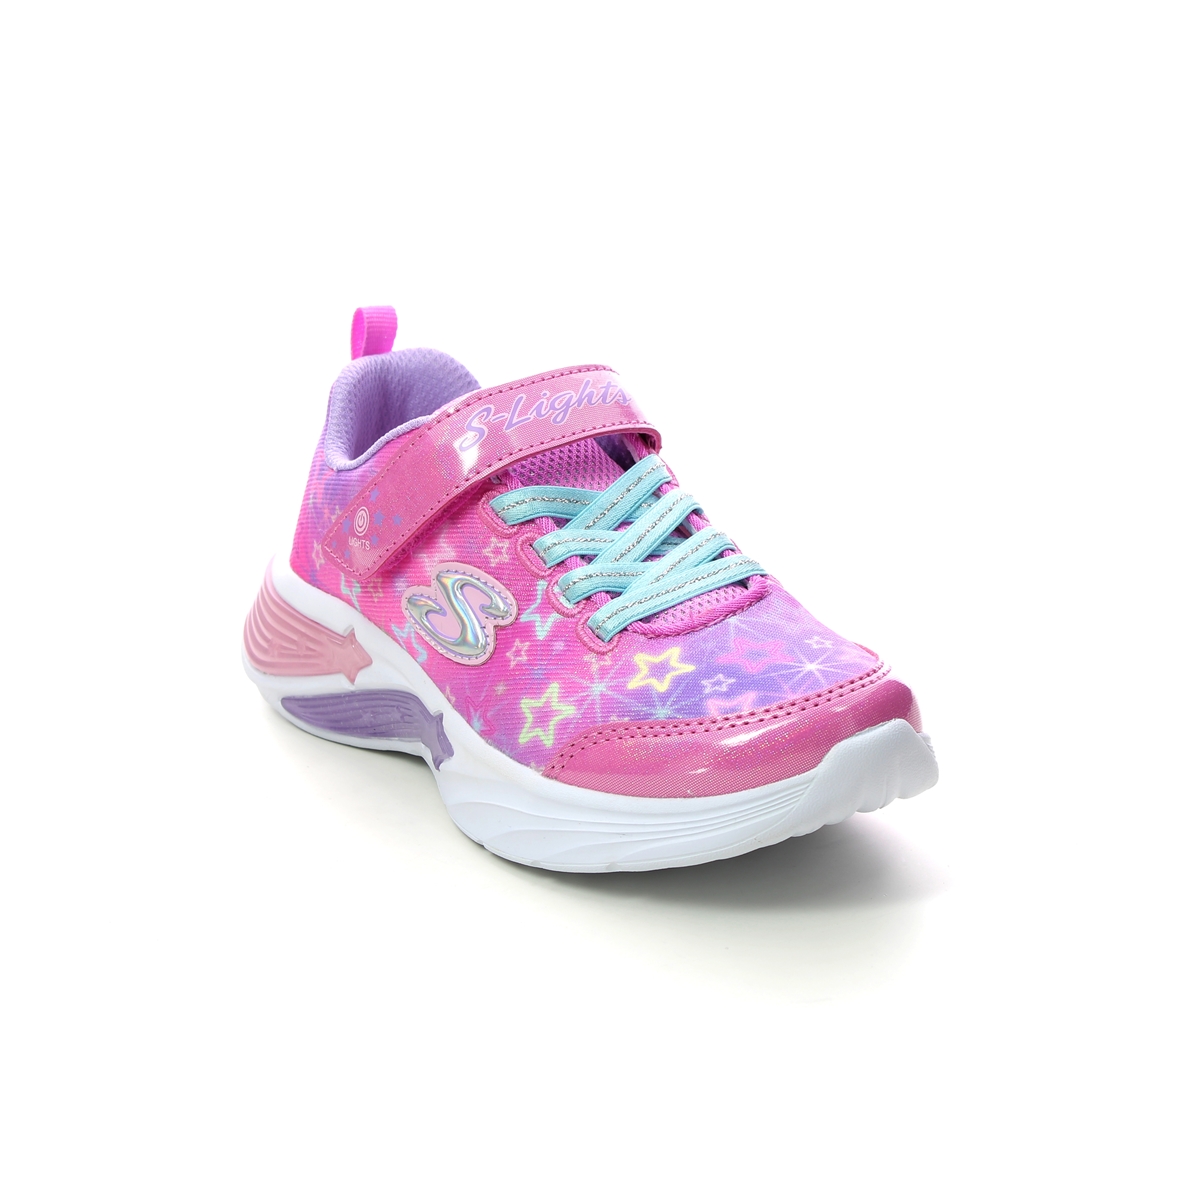 Skechers Star Sparks PKMT Pink Kids girls trainers 302324L in a Plain  in Size 32